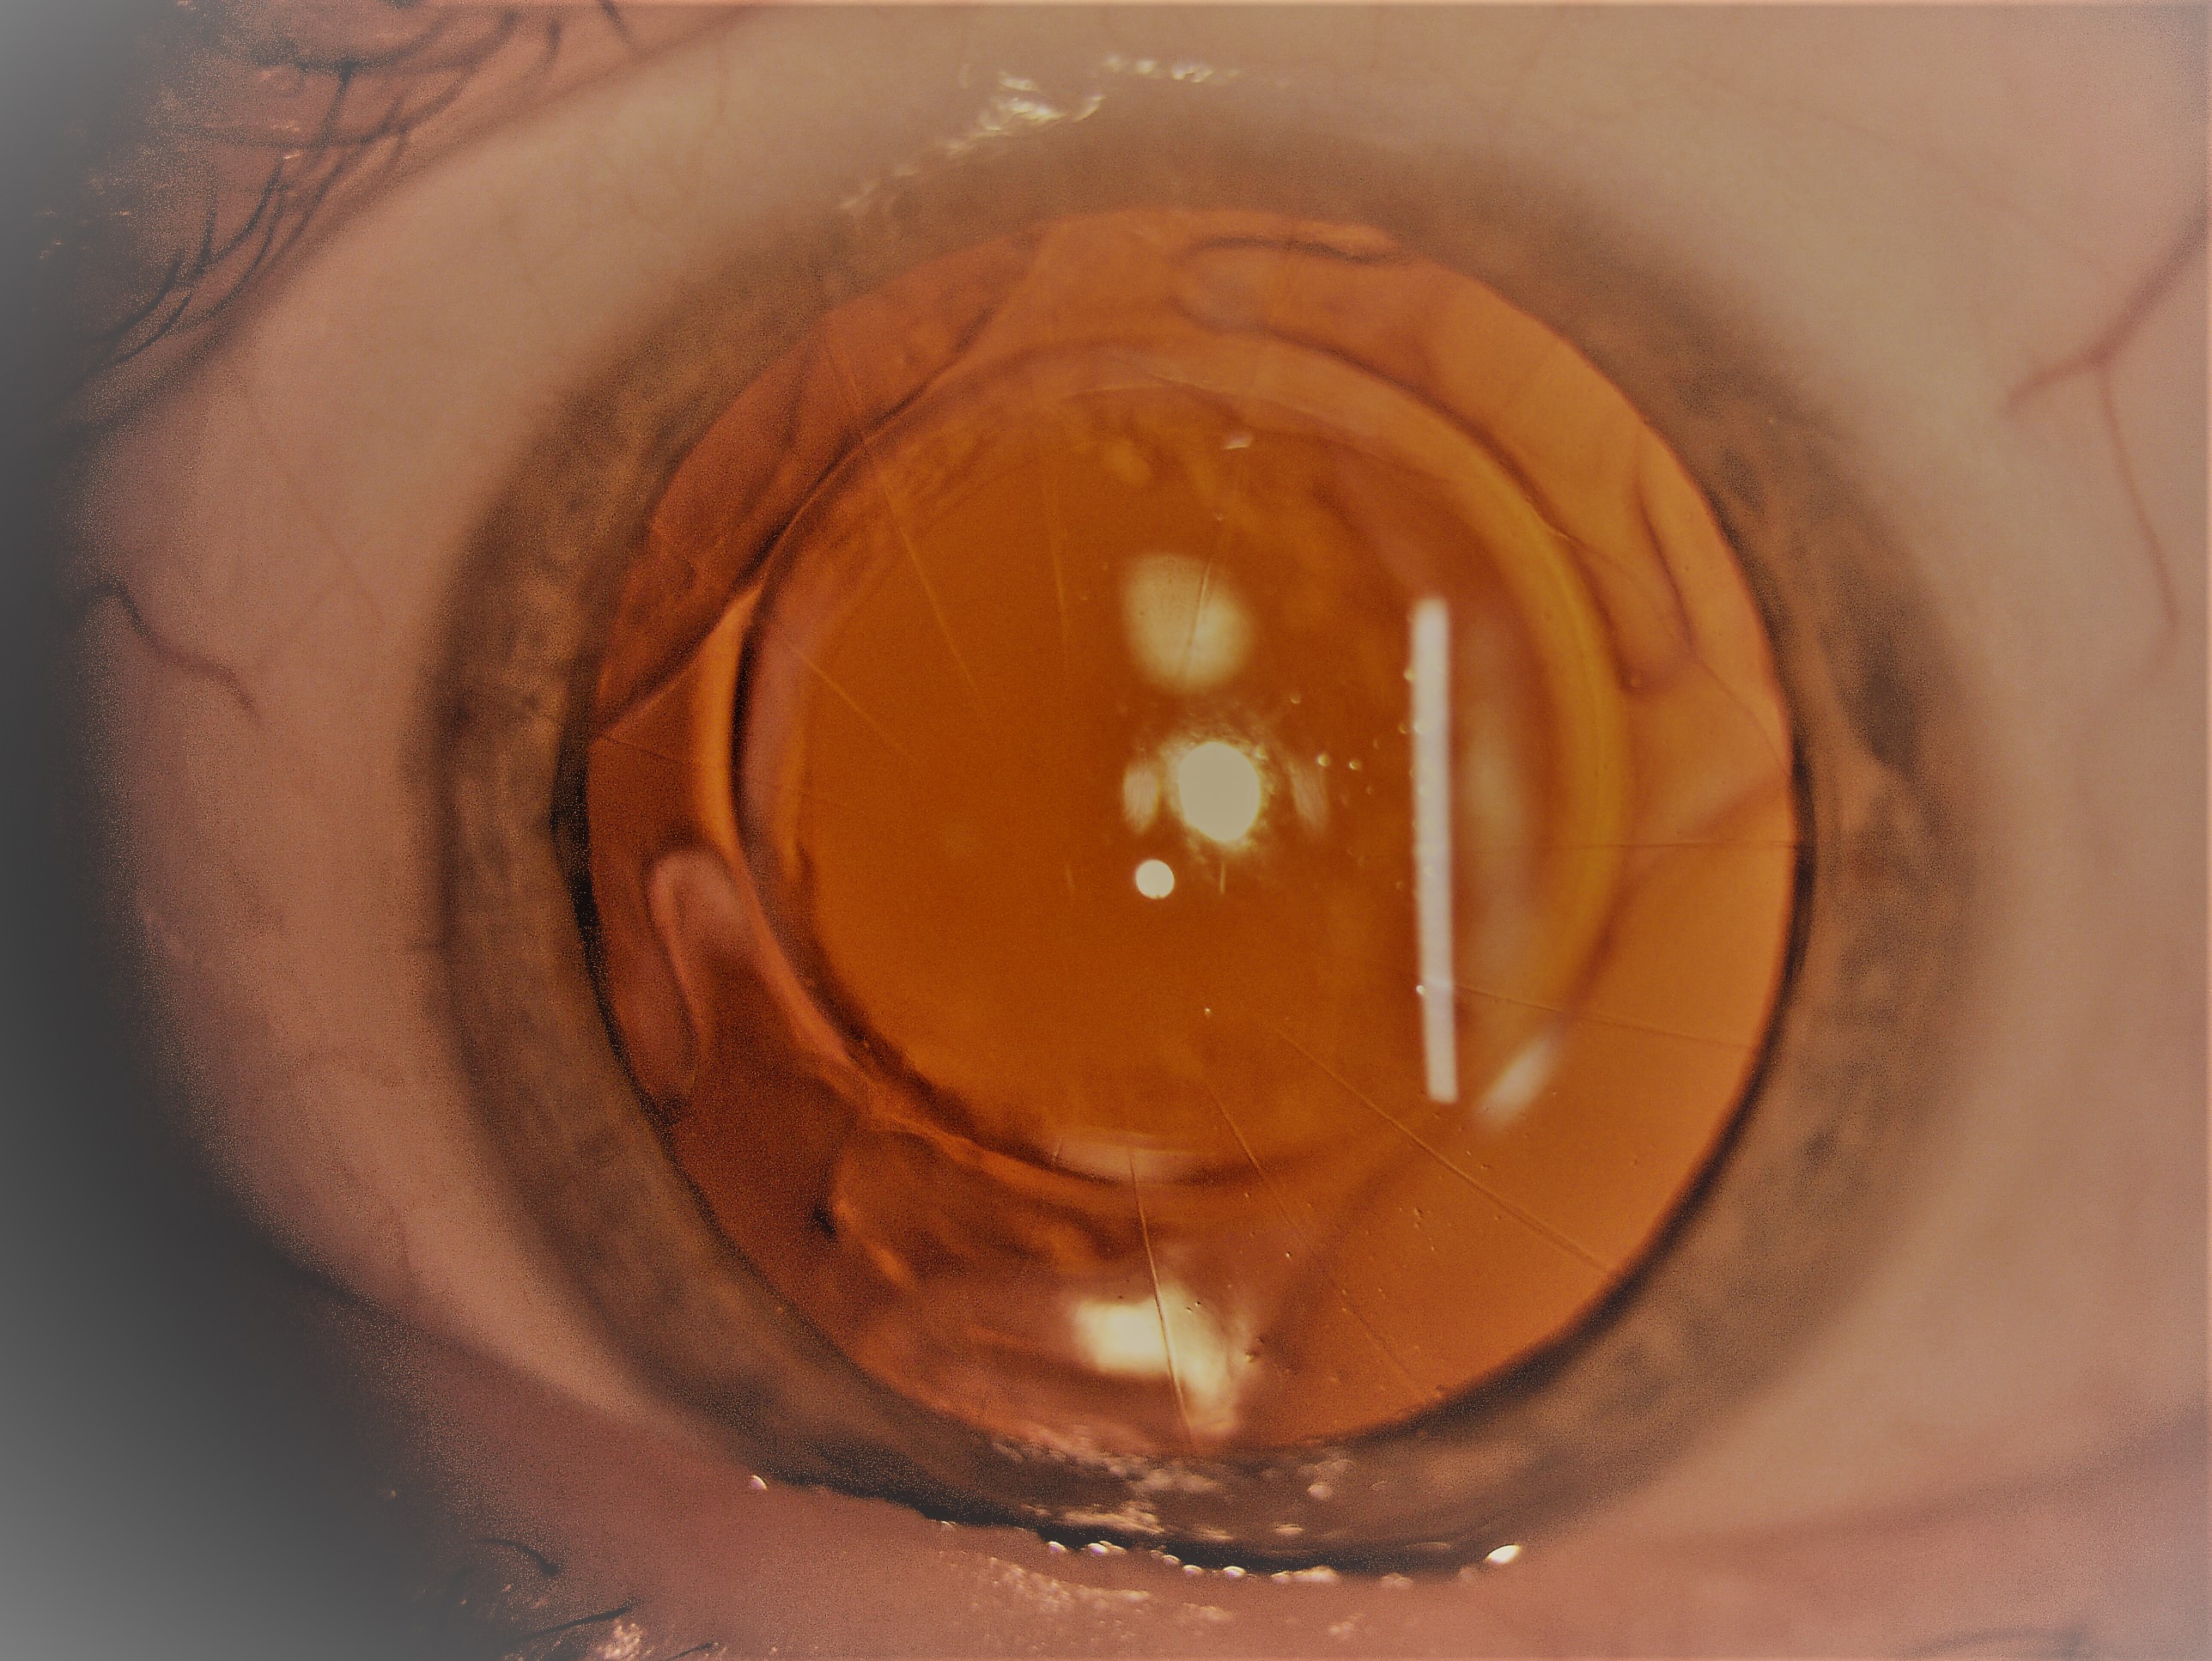 16-incision radial keratotomy in the left eye